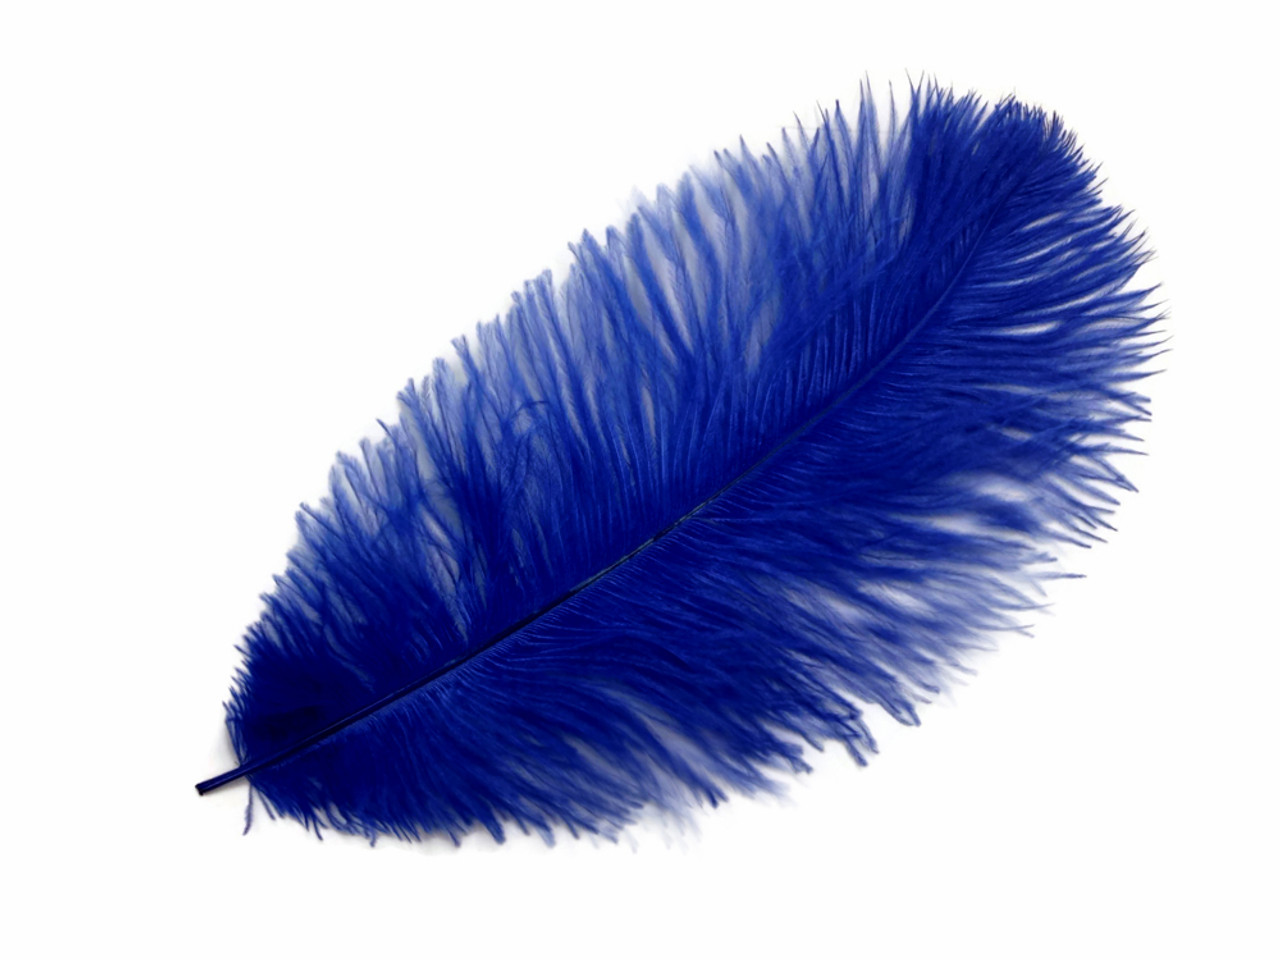 Craft Feathers, Feather Craft Supplies